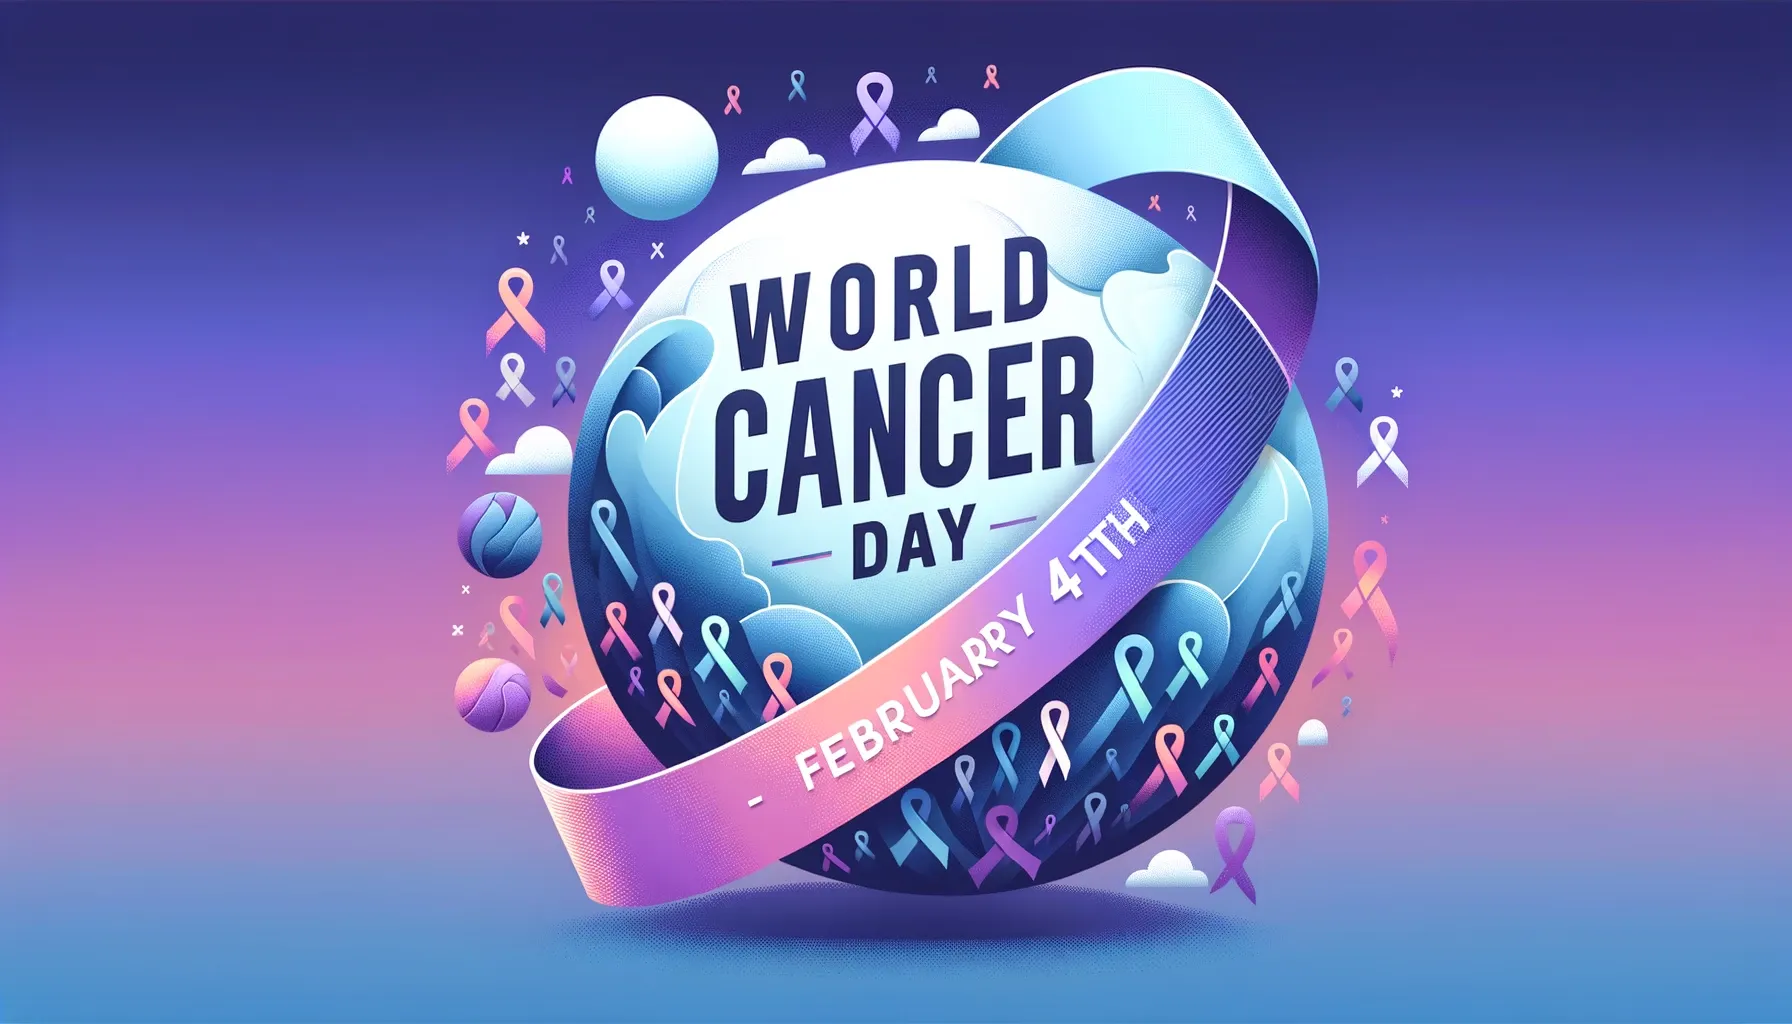 World Cancer Day(Every year on February 4th): Uniting the Globe in the Fight Against Cancer